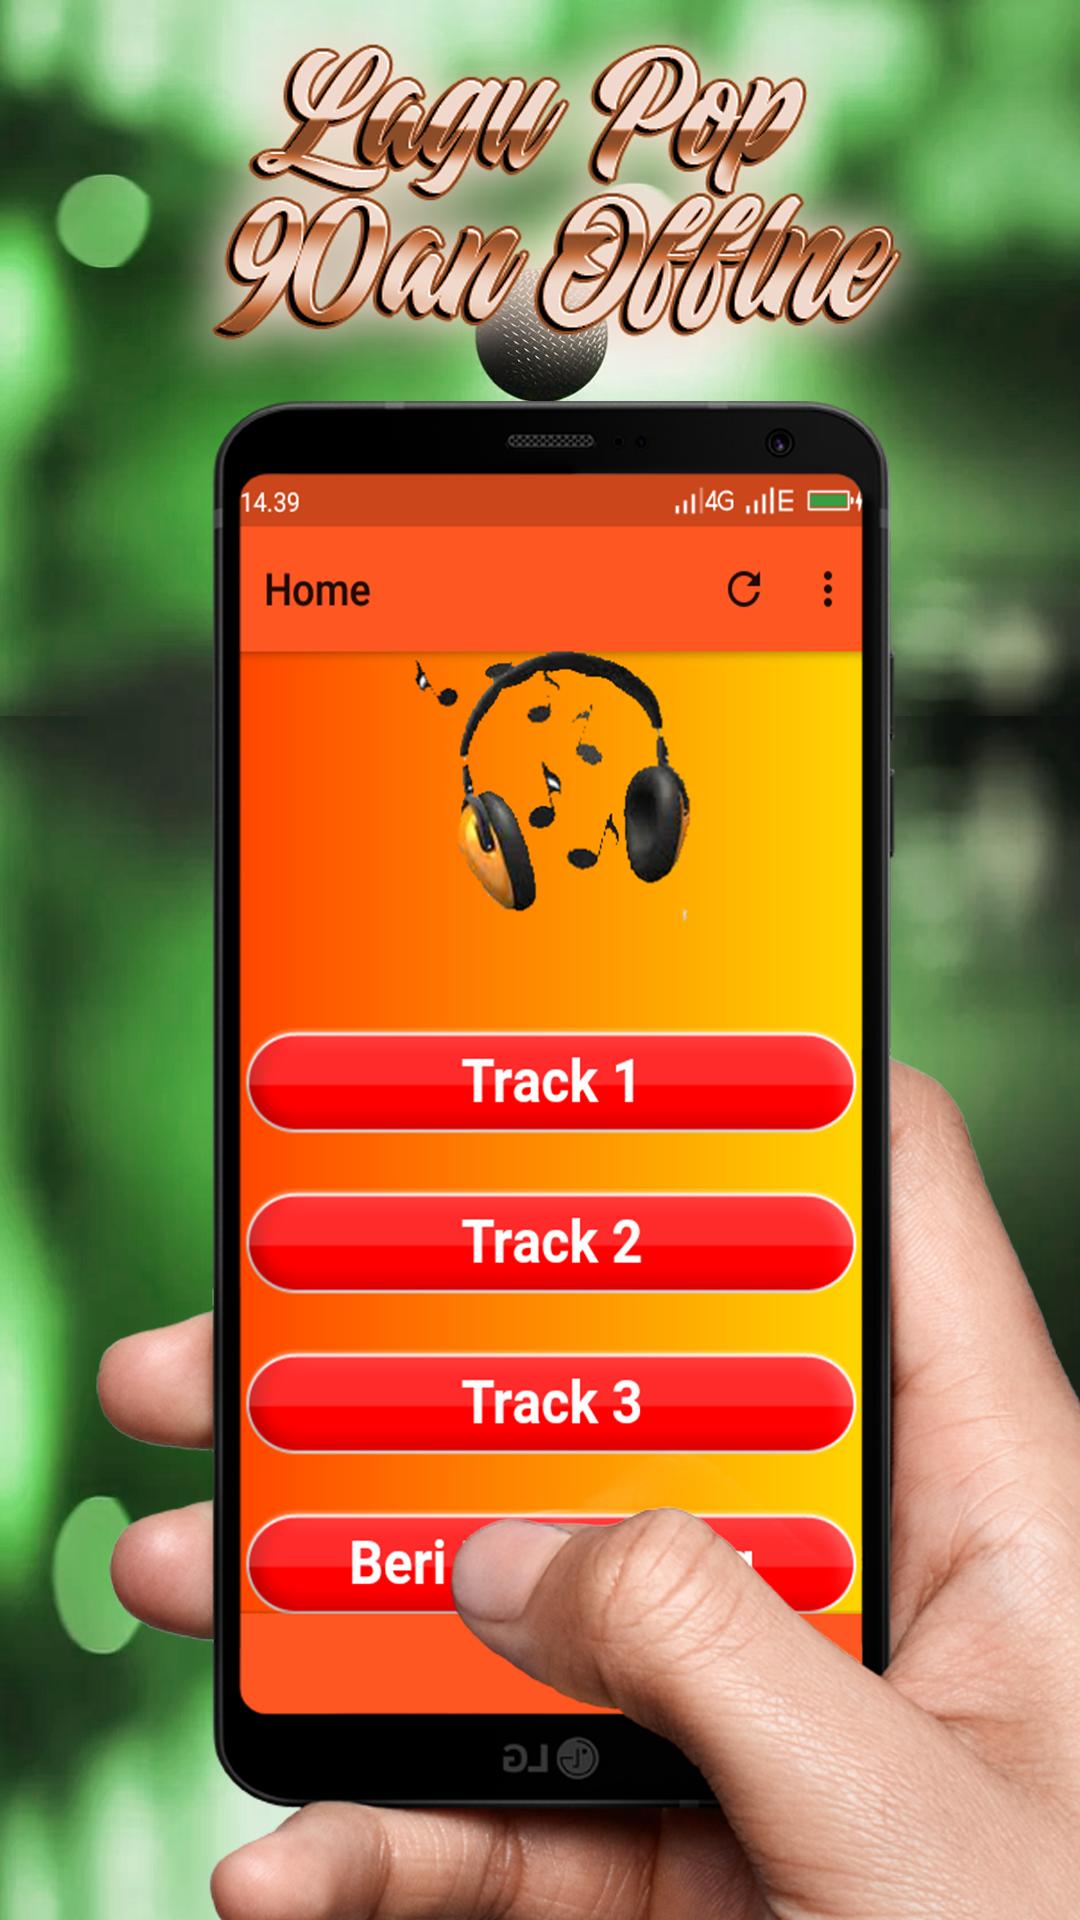 Best Offline 90s Pop Songs Mp3 for Android - APK Download